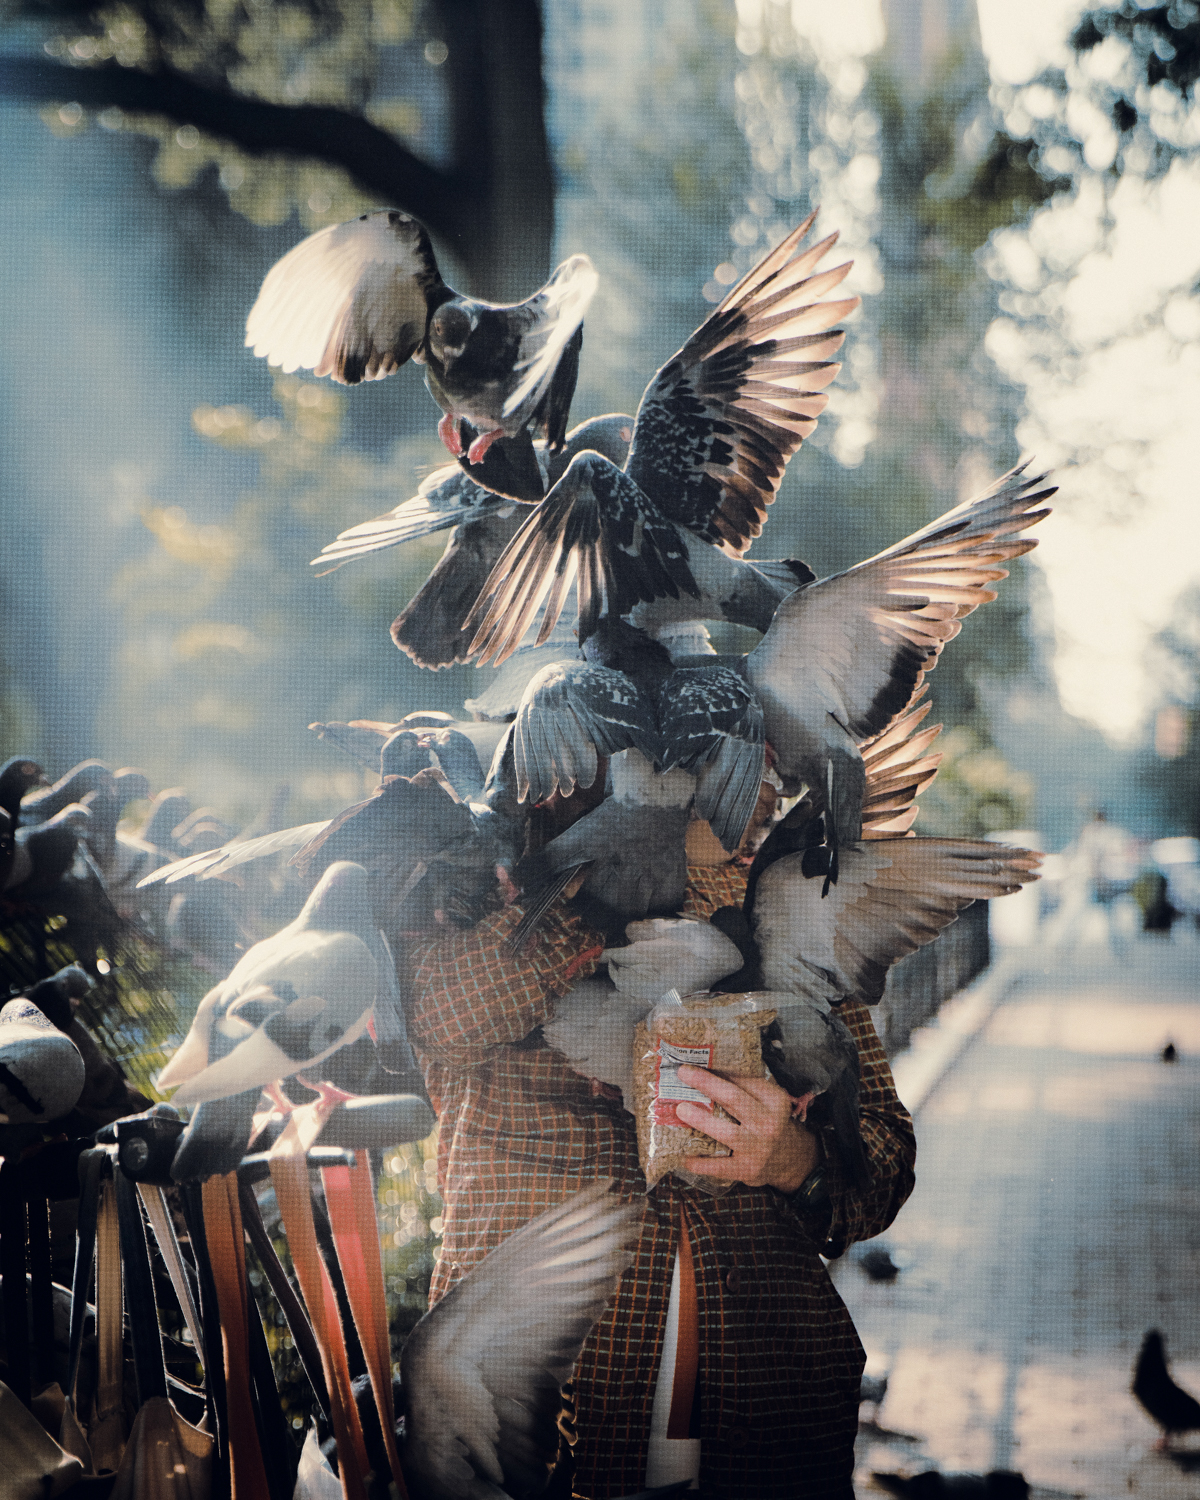 Man Covered in Pigeons by Billy Dinh